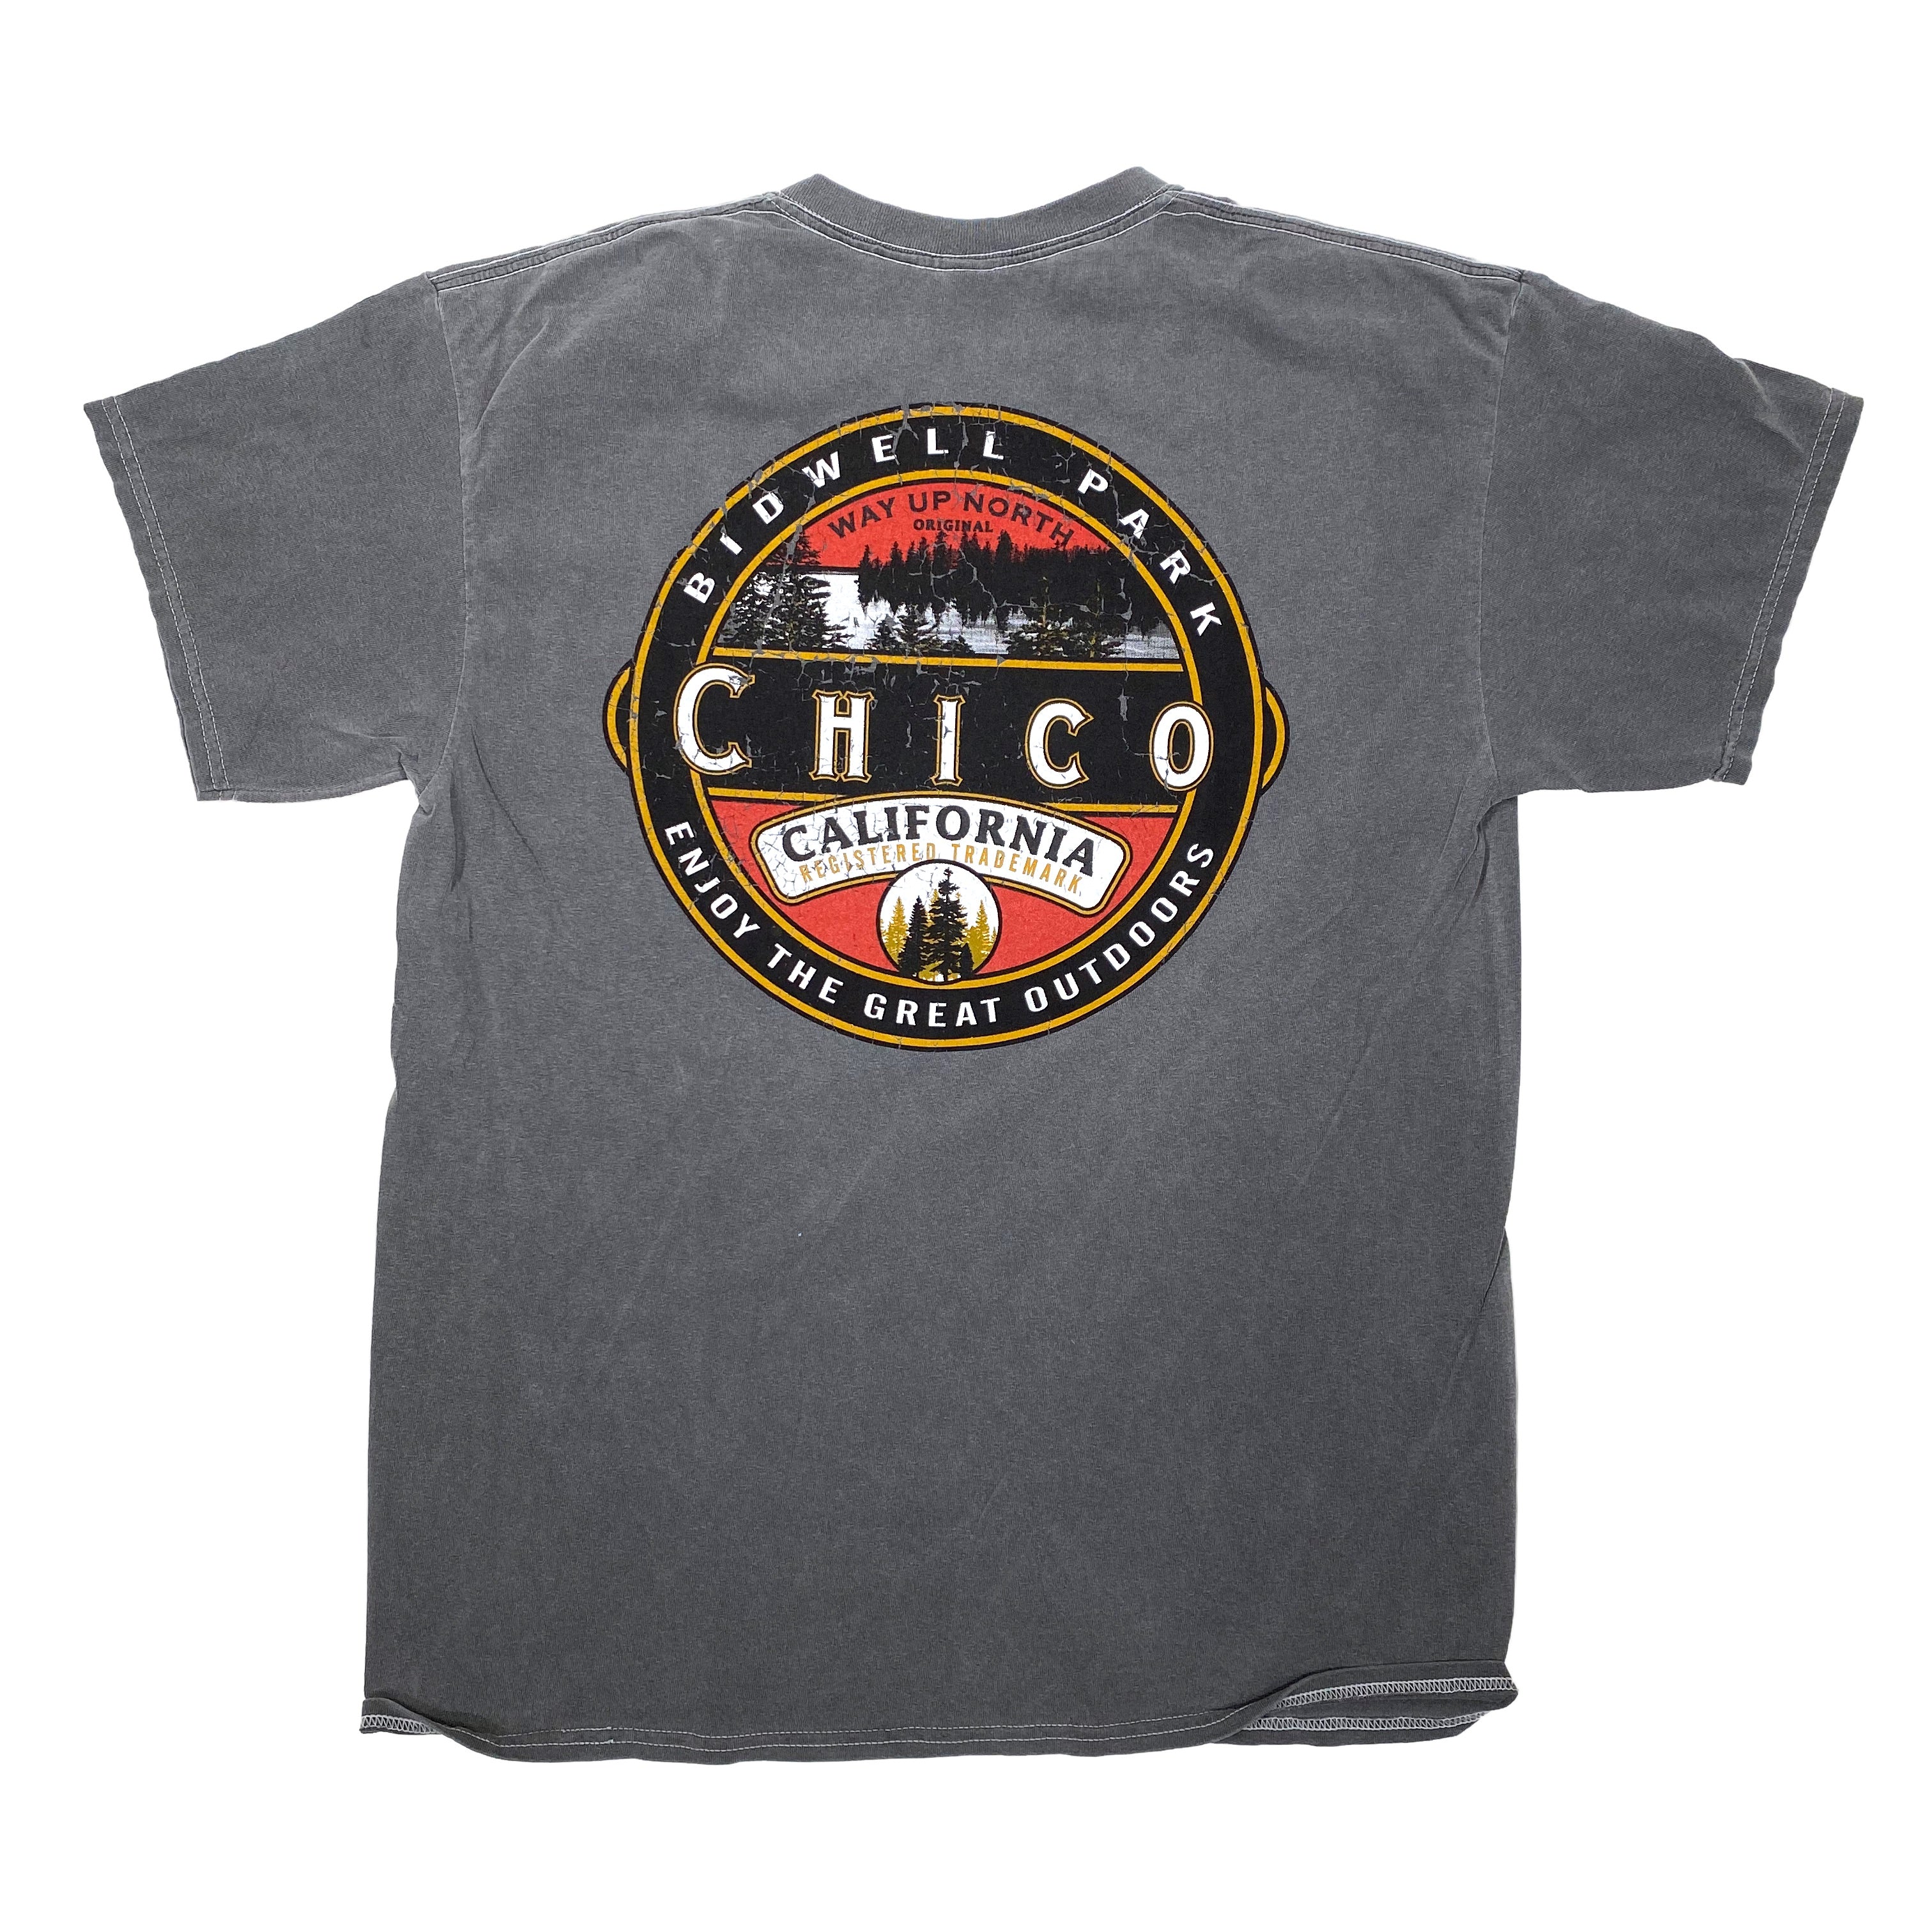 Carson Way Up North Chico - T-Shirt CHARCOAL S  